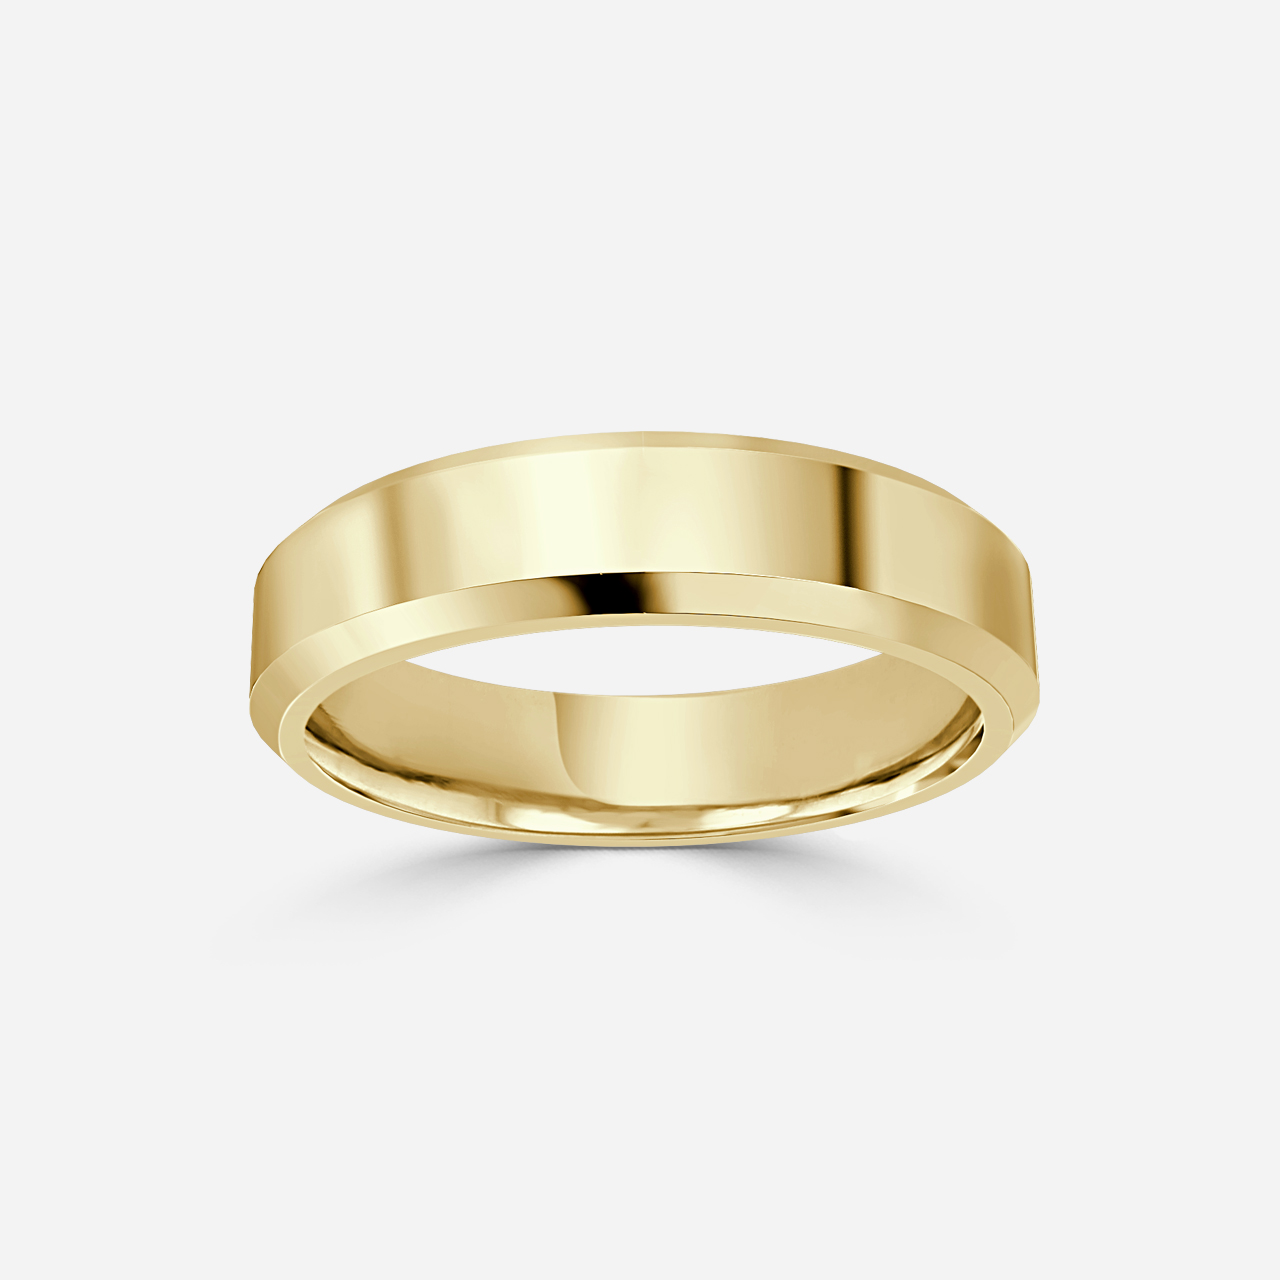 Beveled court wedding ring In Yellow Gold